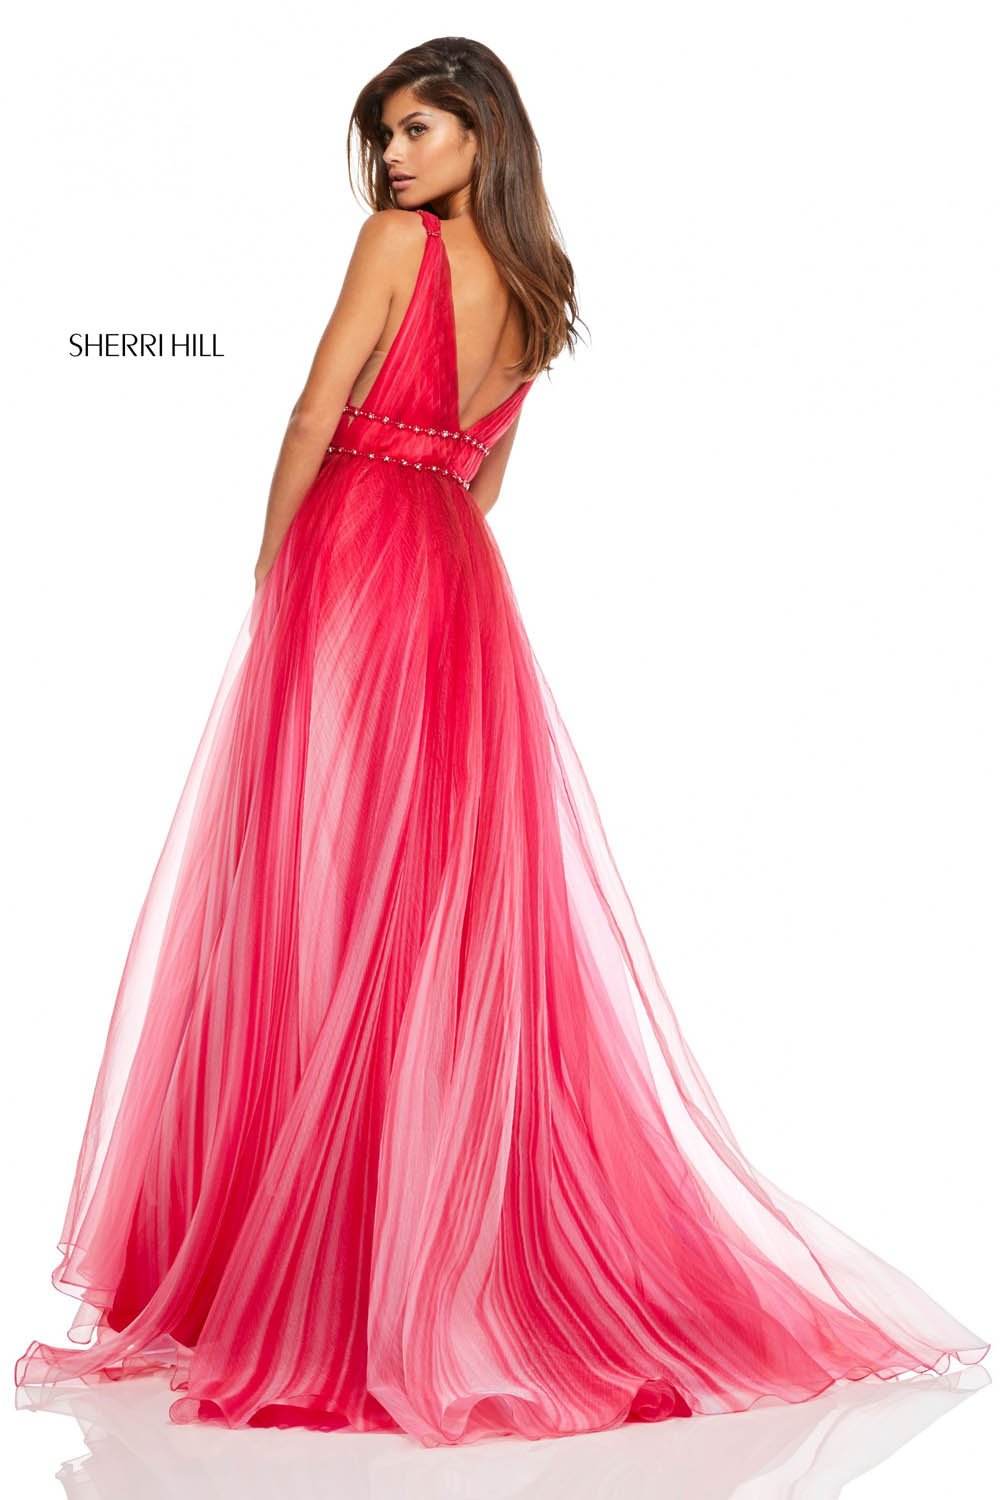 Sherri Hill 52692 dress images in these colors: Fuchsia, Pink Green, Lilac.